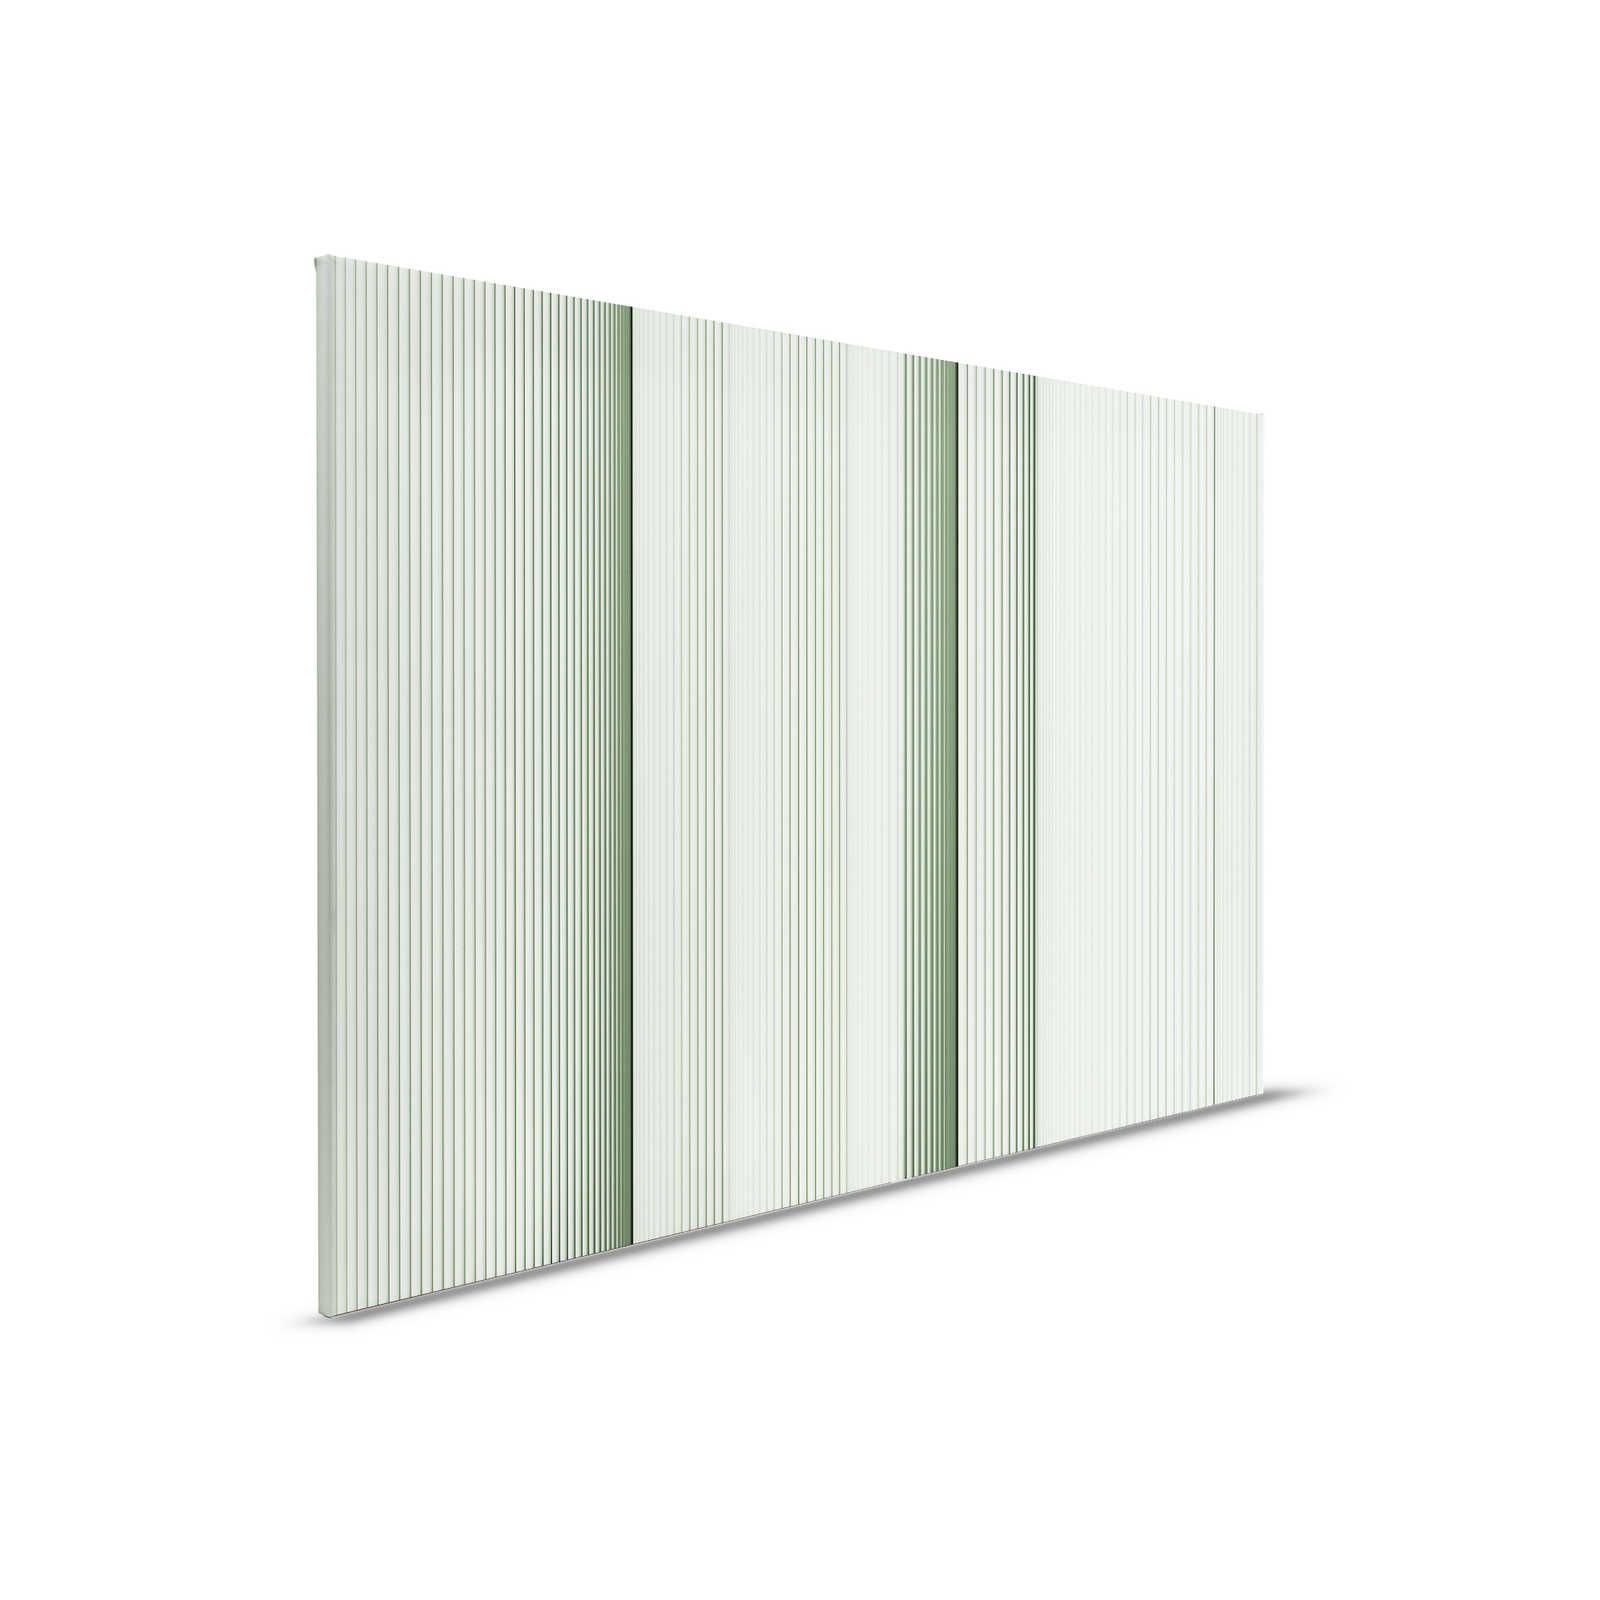         Magic Wall 2 - Green stripes canvas picture with 3D illusion effect - 0,90 m x 0,60 m
    